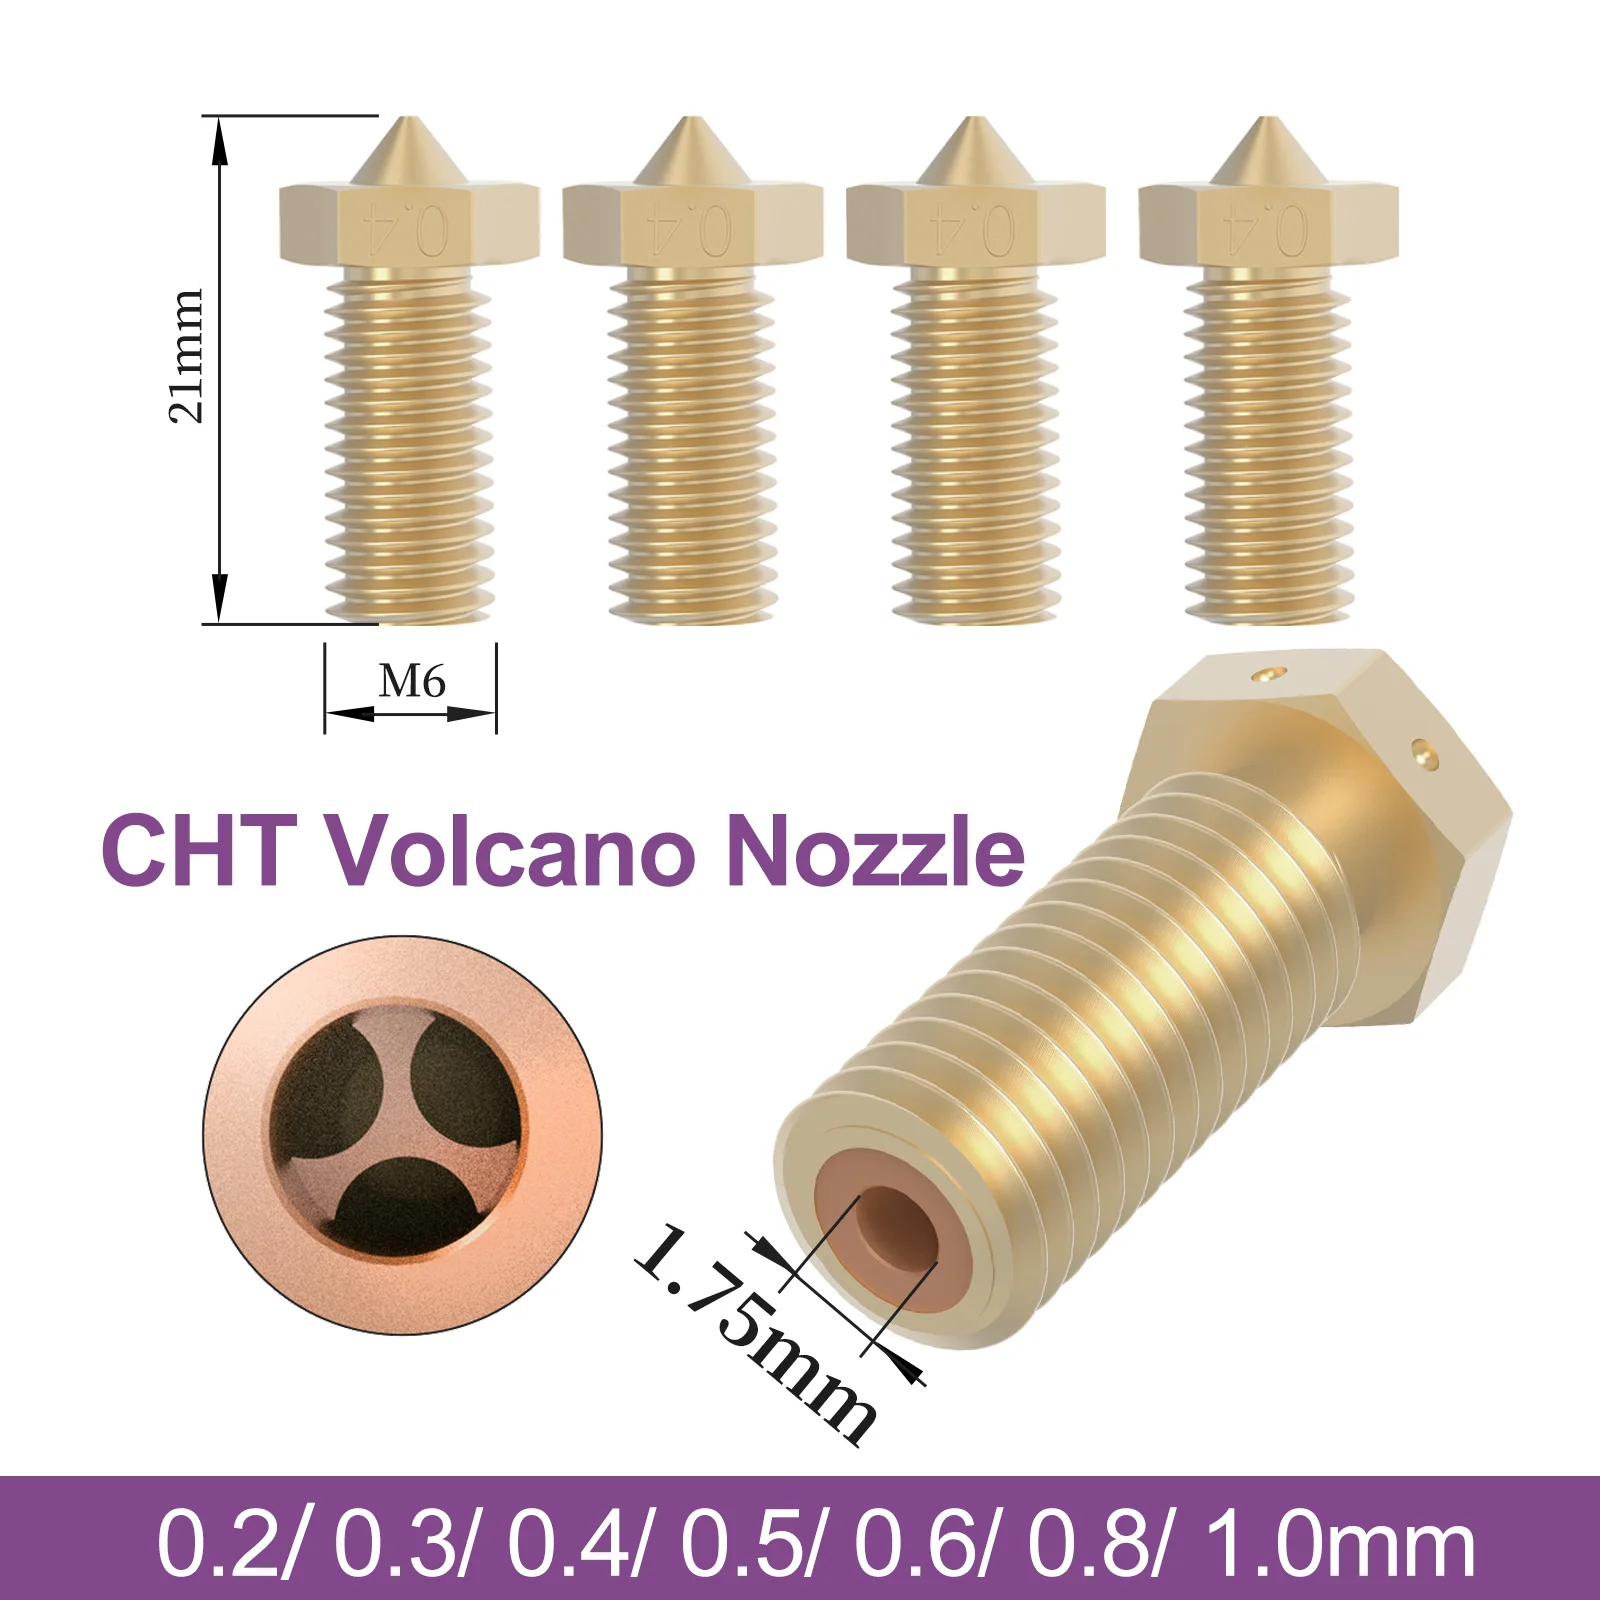 CHT Volcano Nozzle Extruder Nozzles High Flow Three-eyes For 1.75mm Brass Nozzles Hotend Extruder E3D Volcano 3D Printer Parts